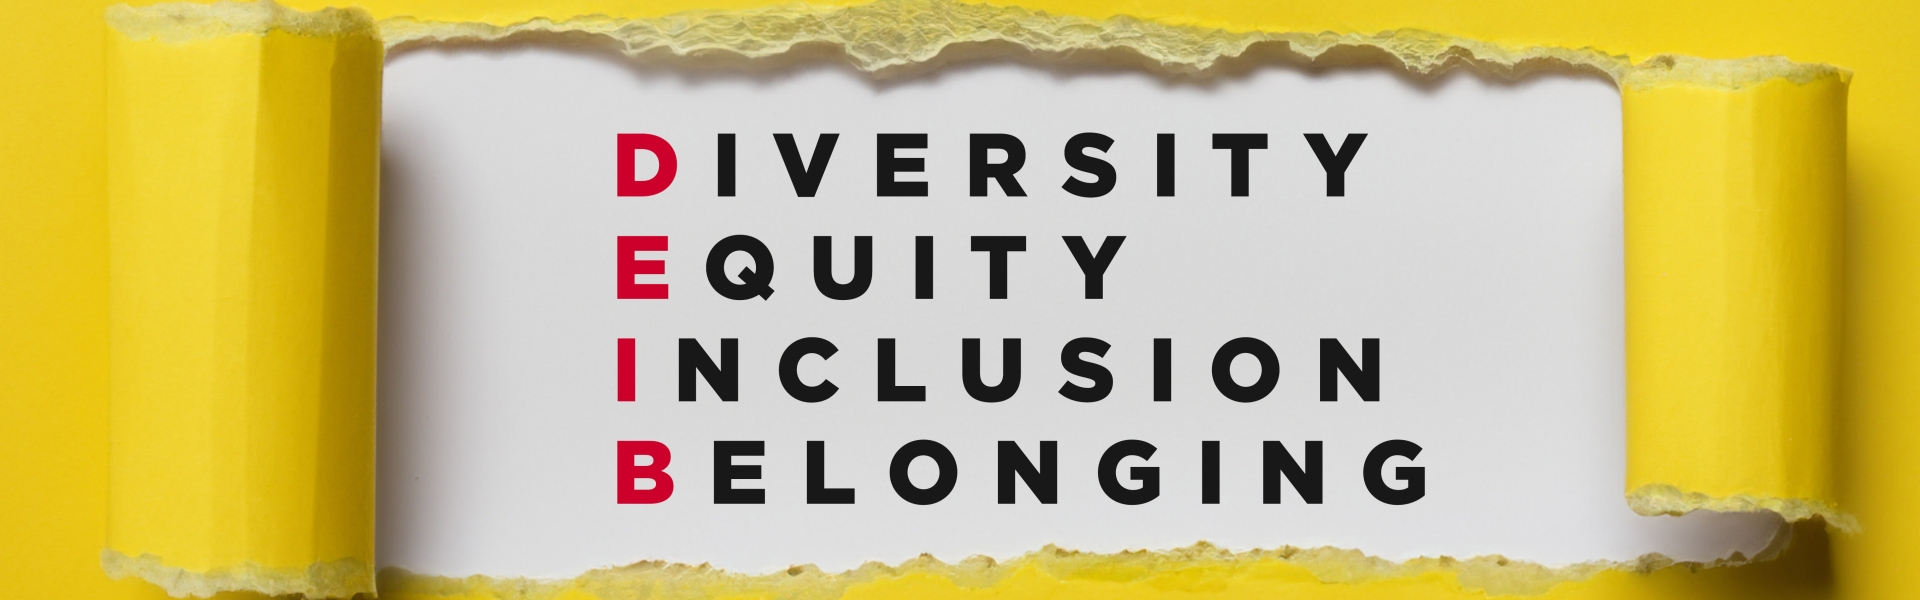 Diversity Equity Inclusion Belonging graphic